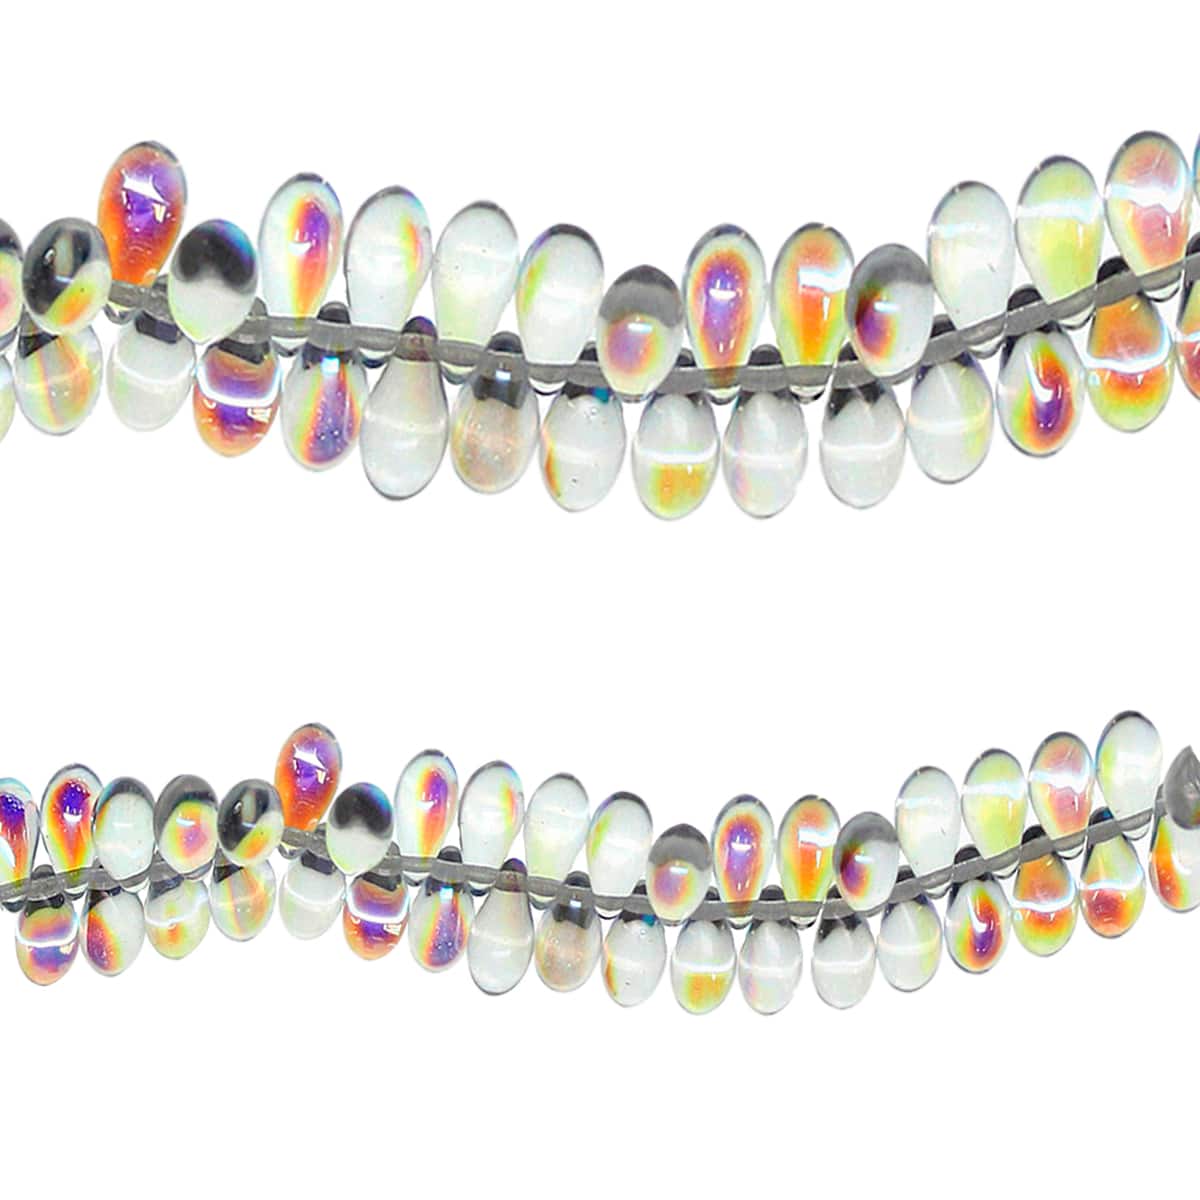 5pcs 24x17mm Teardrop Faceted Glass Crystal Loose Spacer Beads Jewelry DIY#Q 